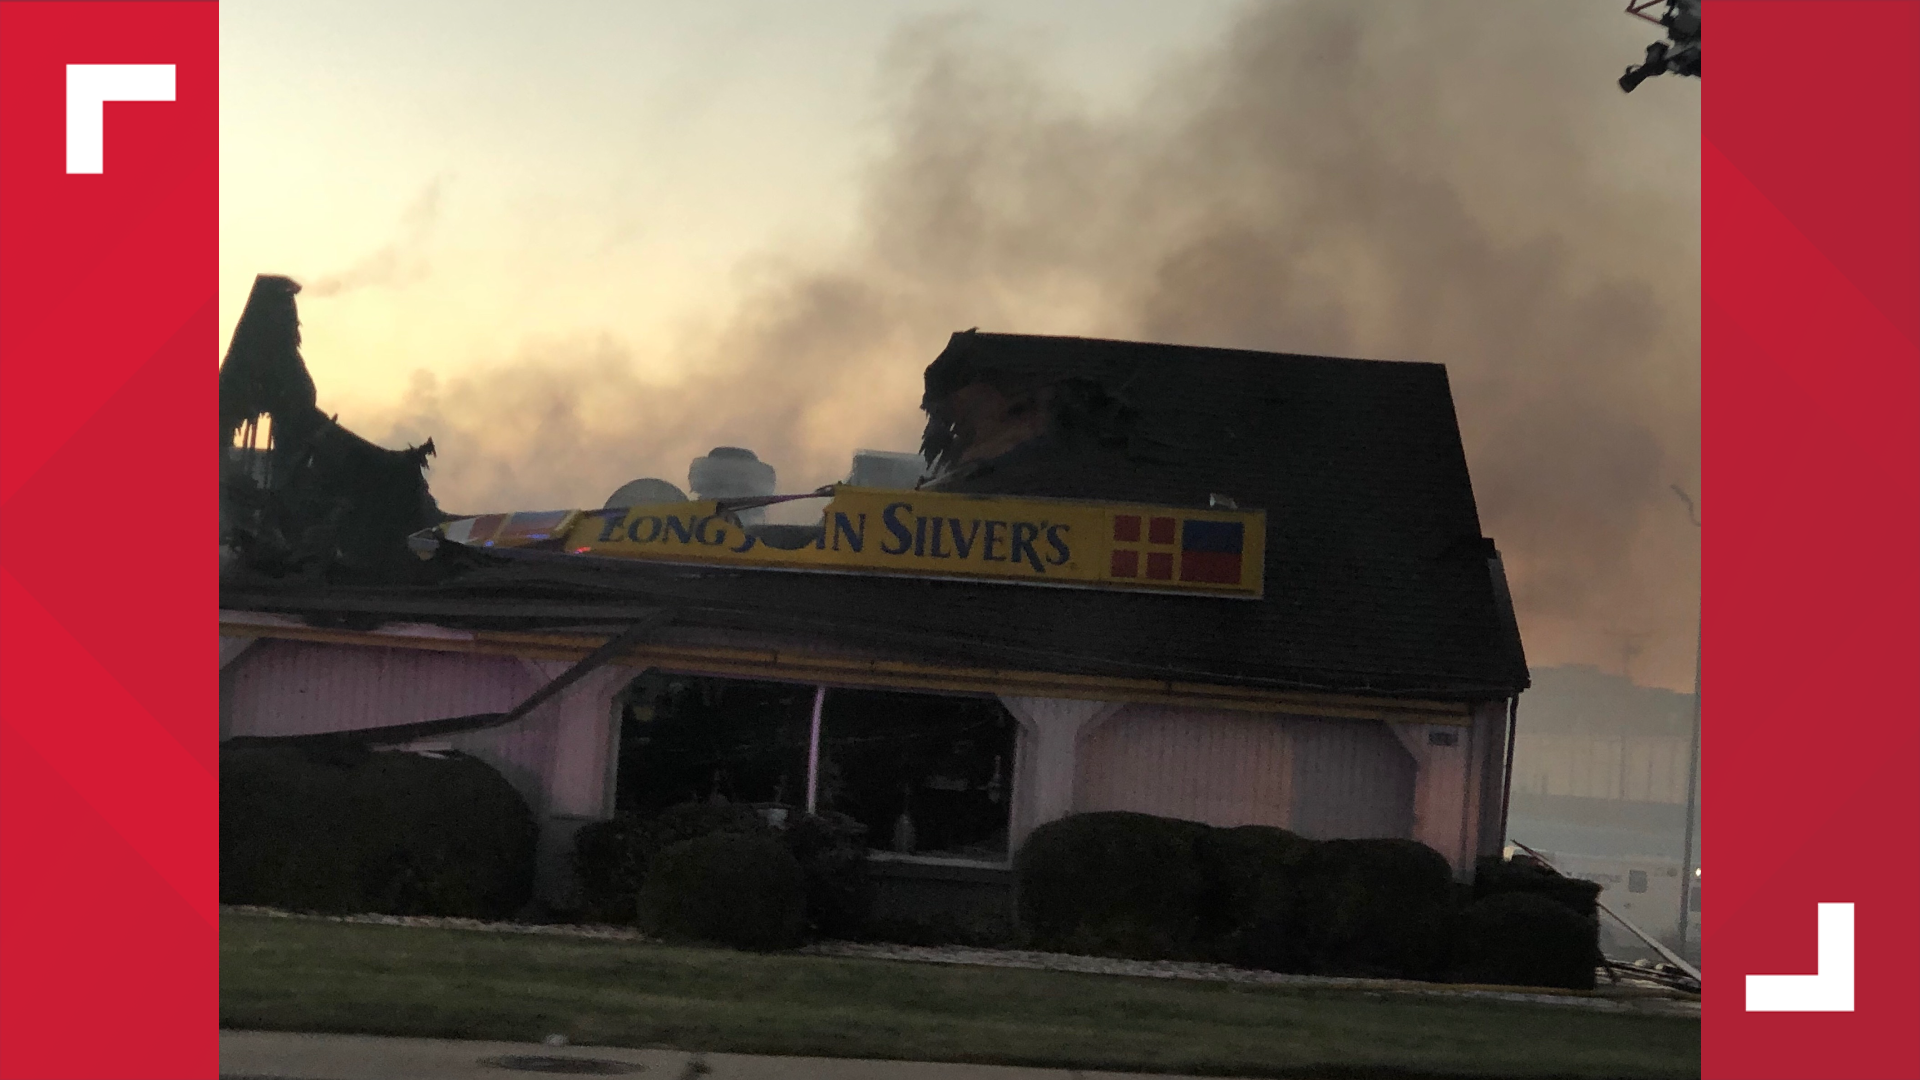 Officials said all employees and customers made it out of the buildings.